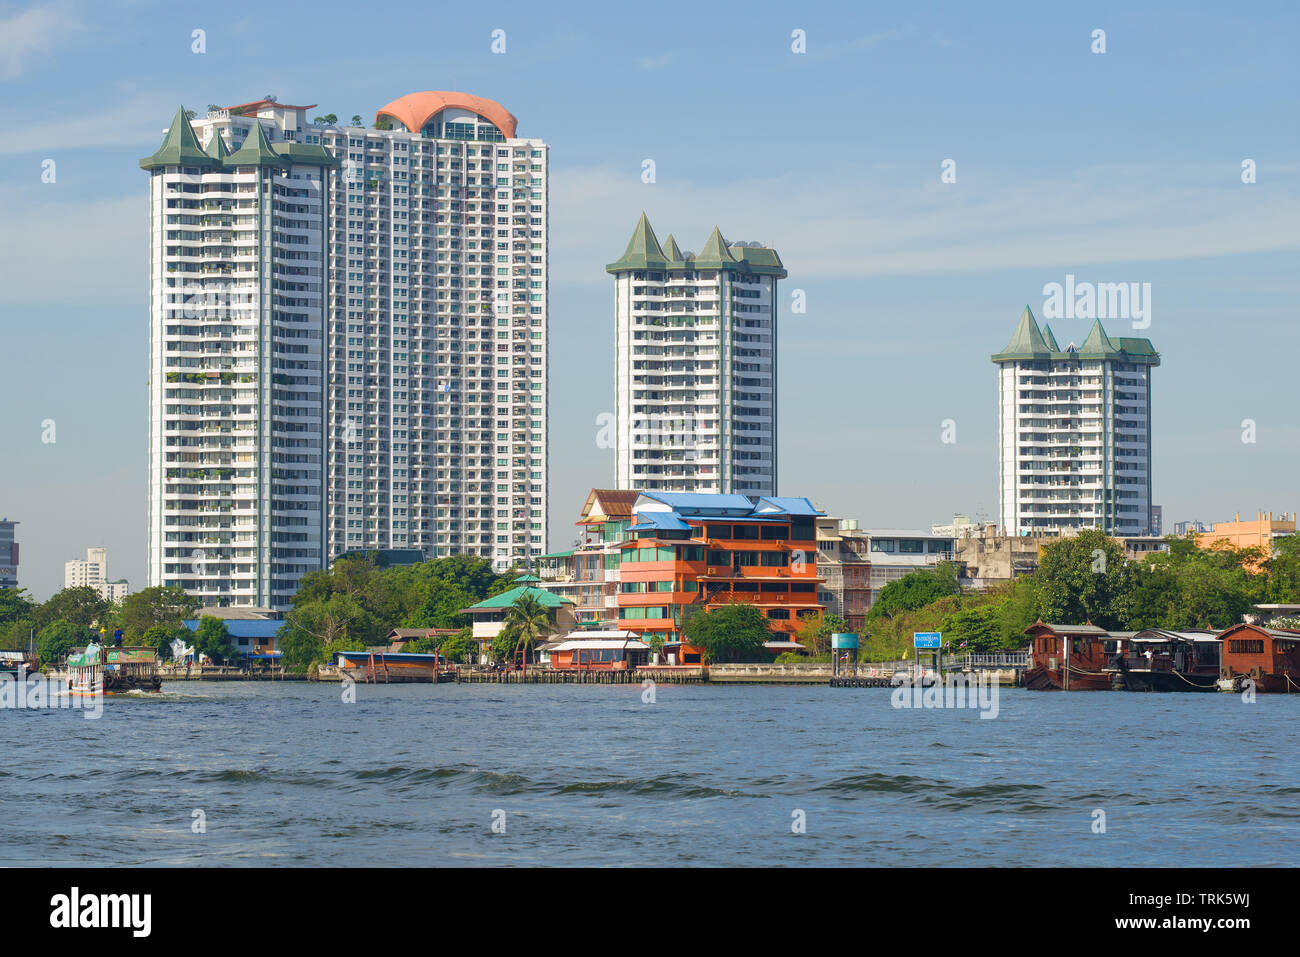 BANGKOK, THAILAND - JANUARY 02, 2019: View of new high-rise apartment buildings on the bank of the Chao Phraya River on a sunny day Stock Photo